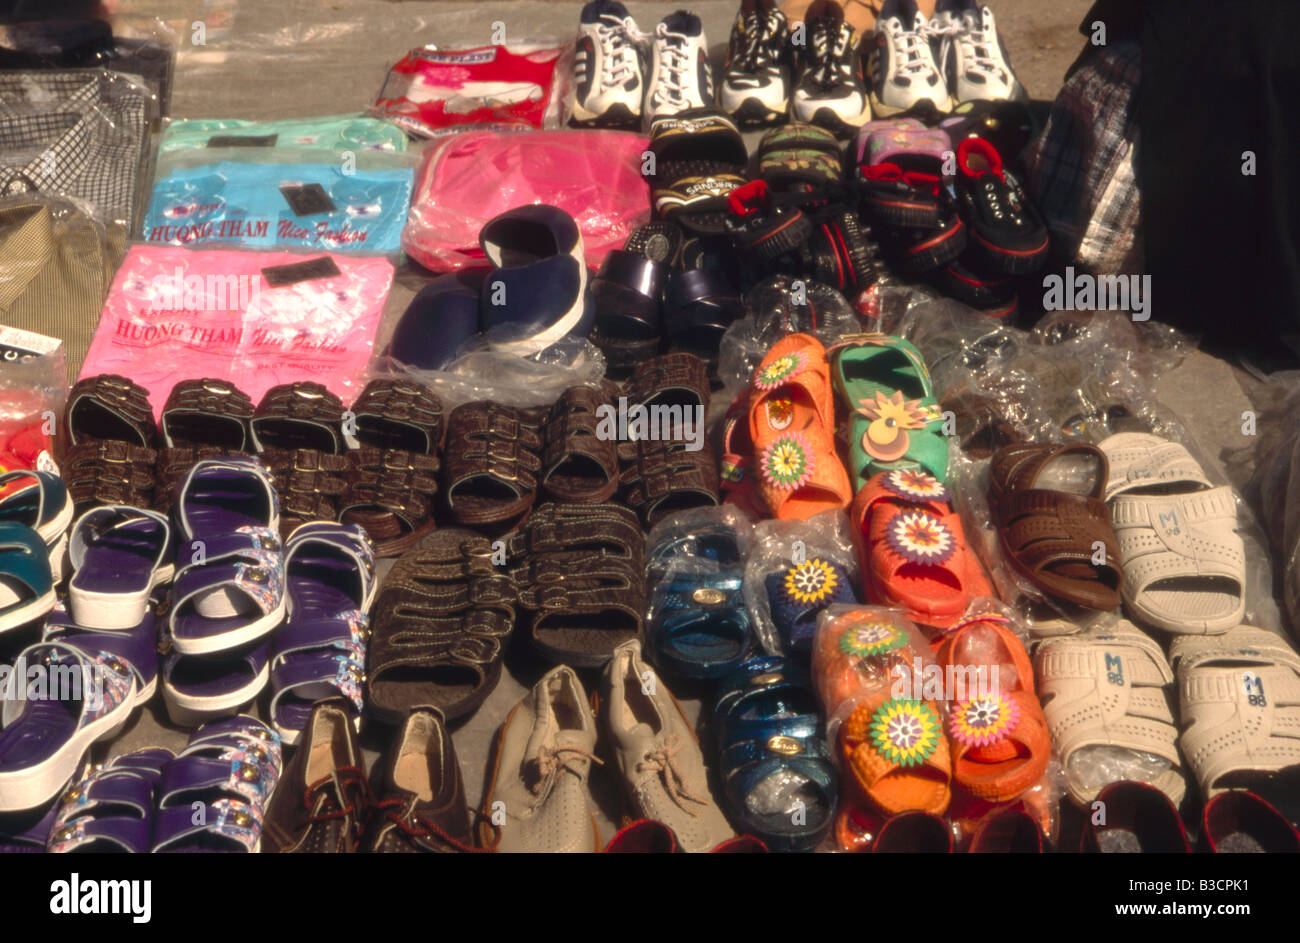 Shoes laid out on sale in street, Gori, Georgia Stock Photo